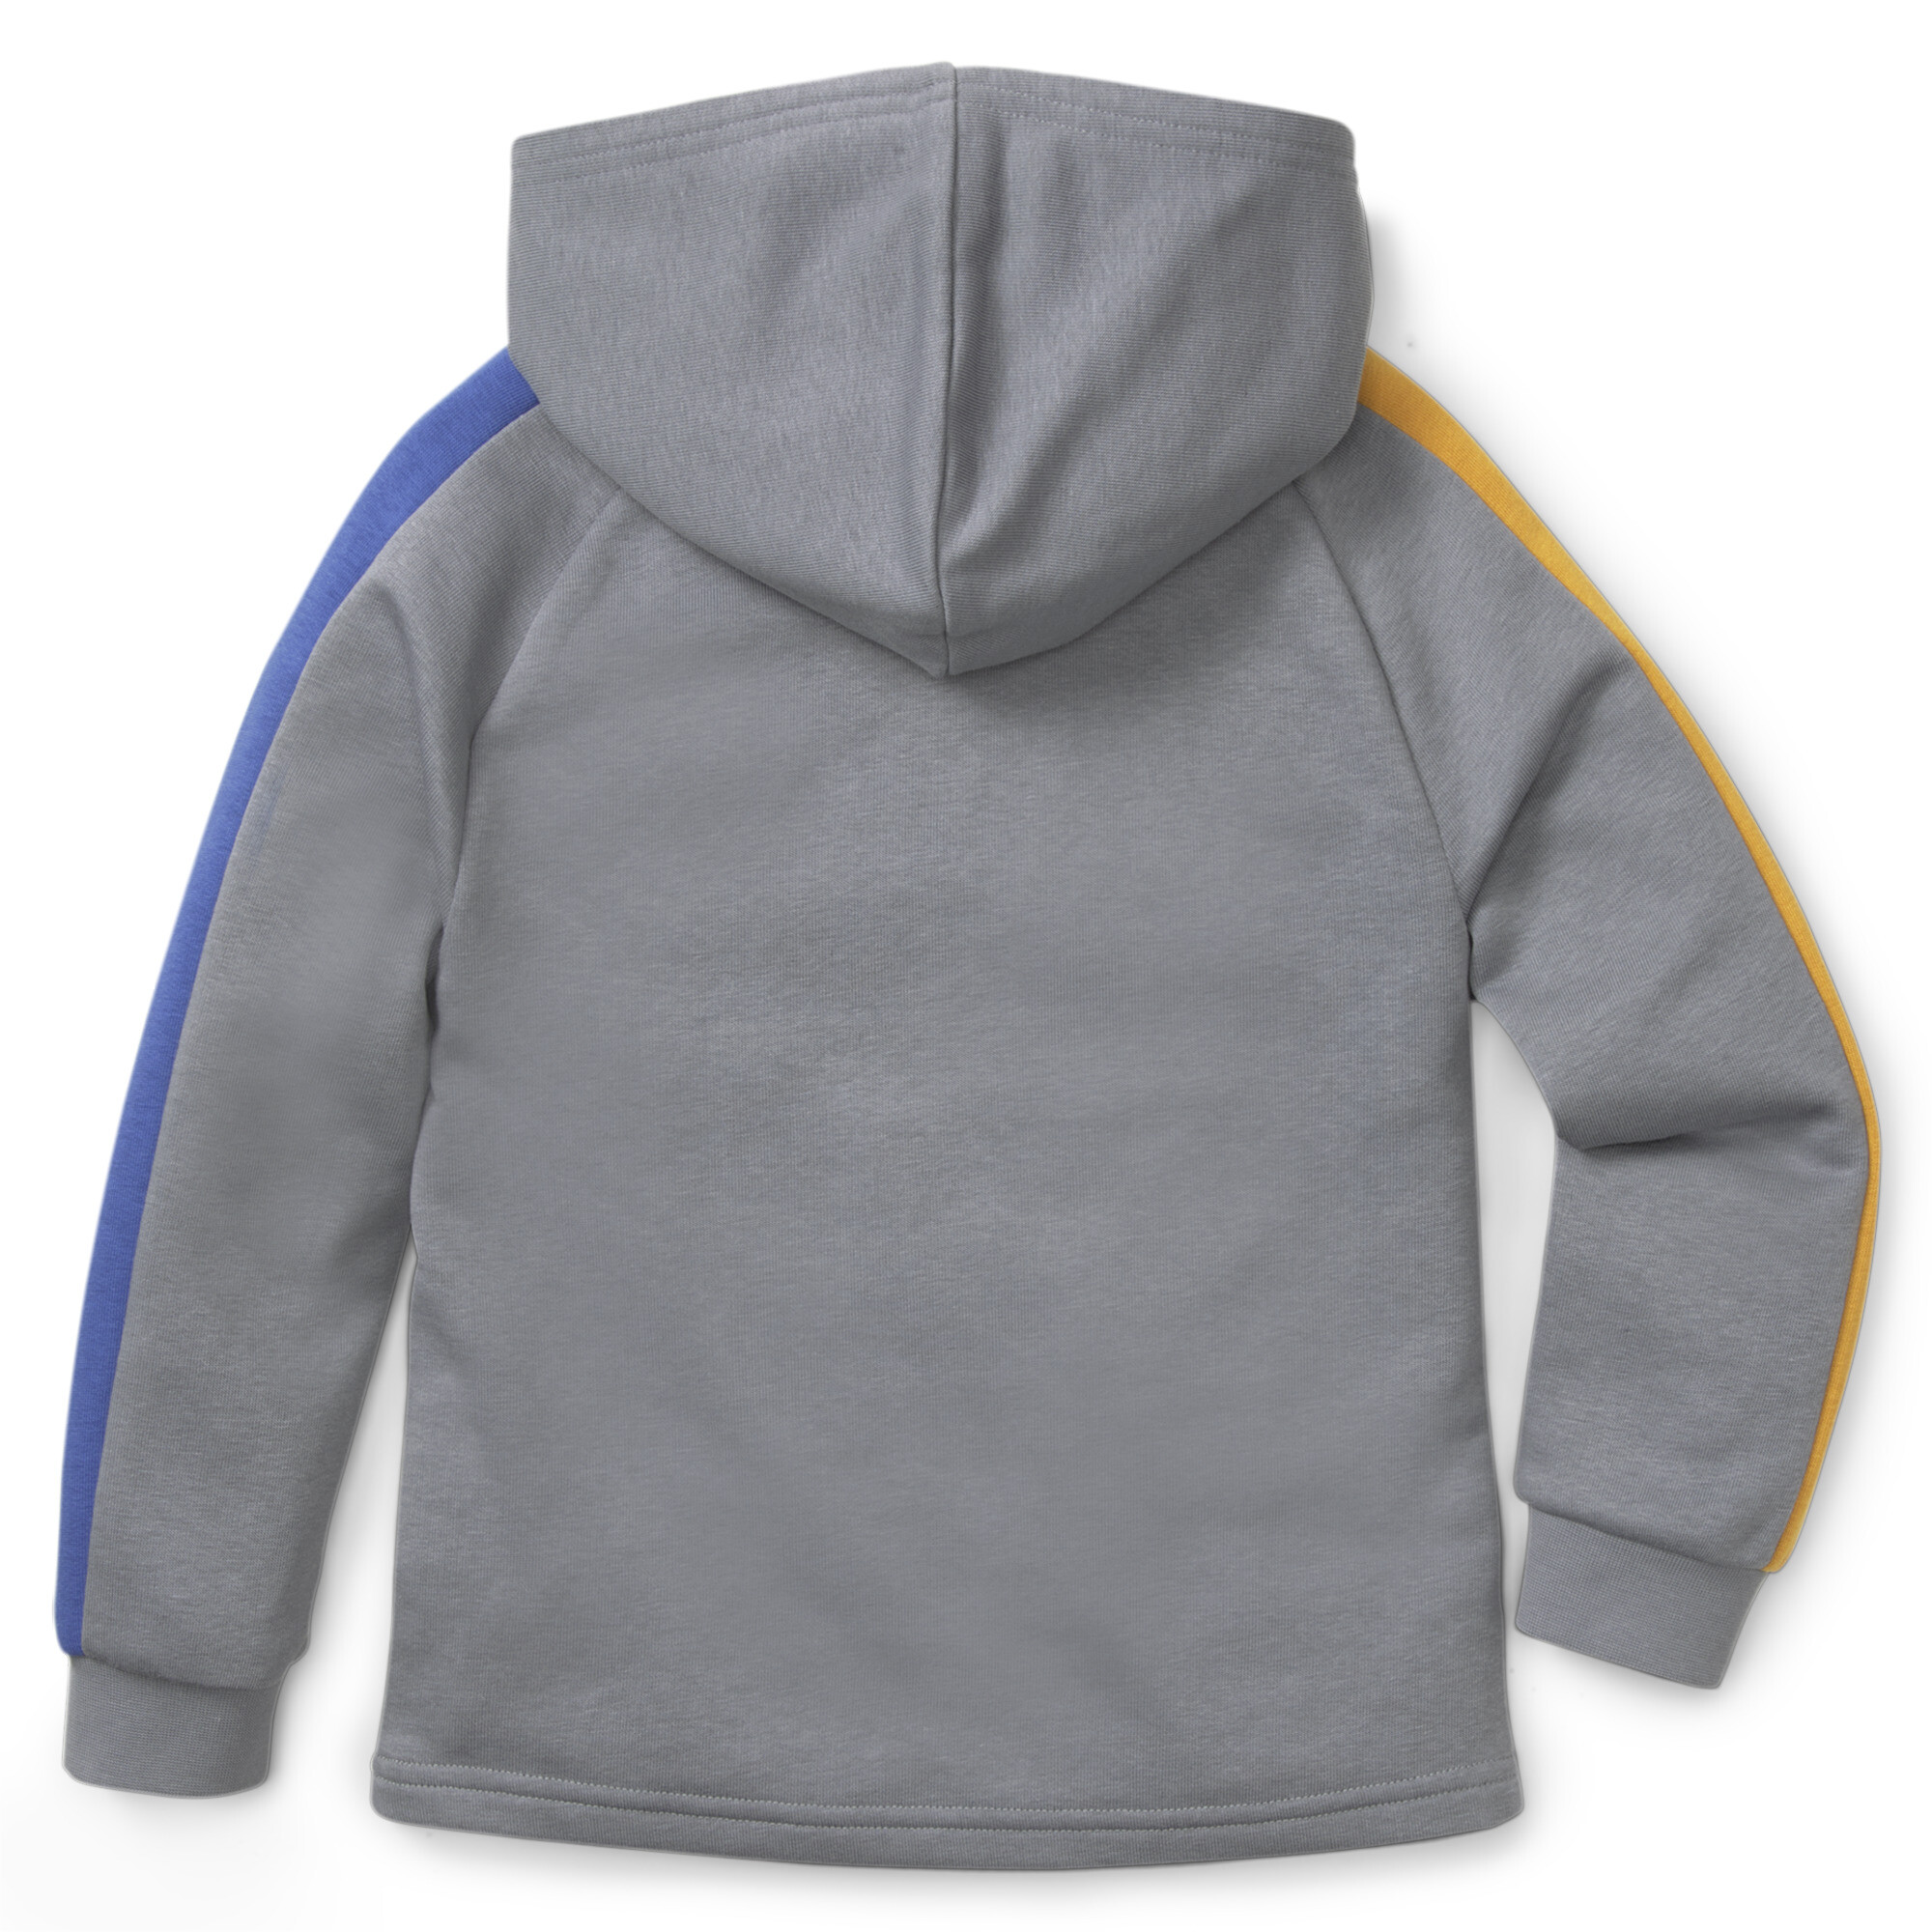 PUMA MATES T7 Hoodie Kids In Gray, Size 7-8 Youth